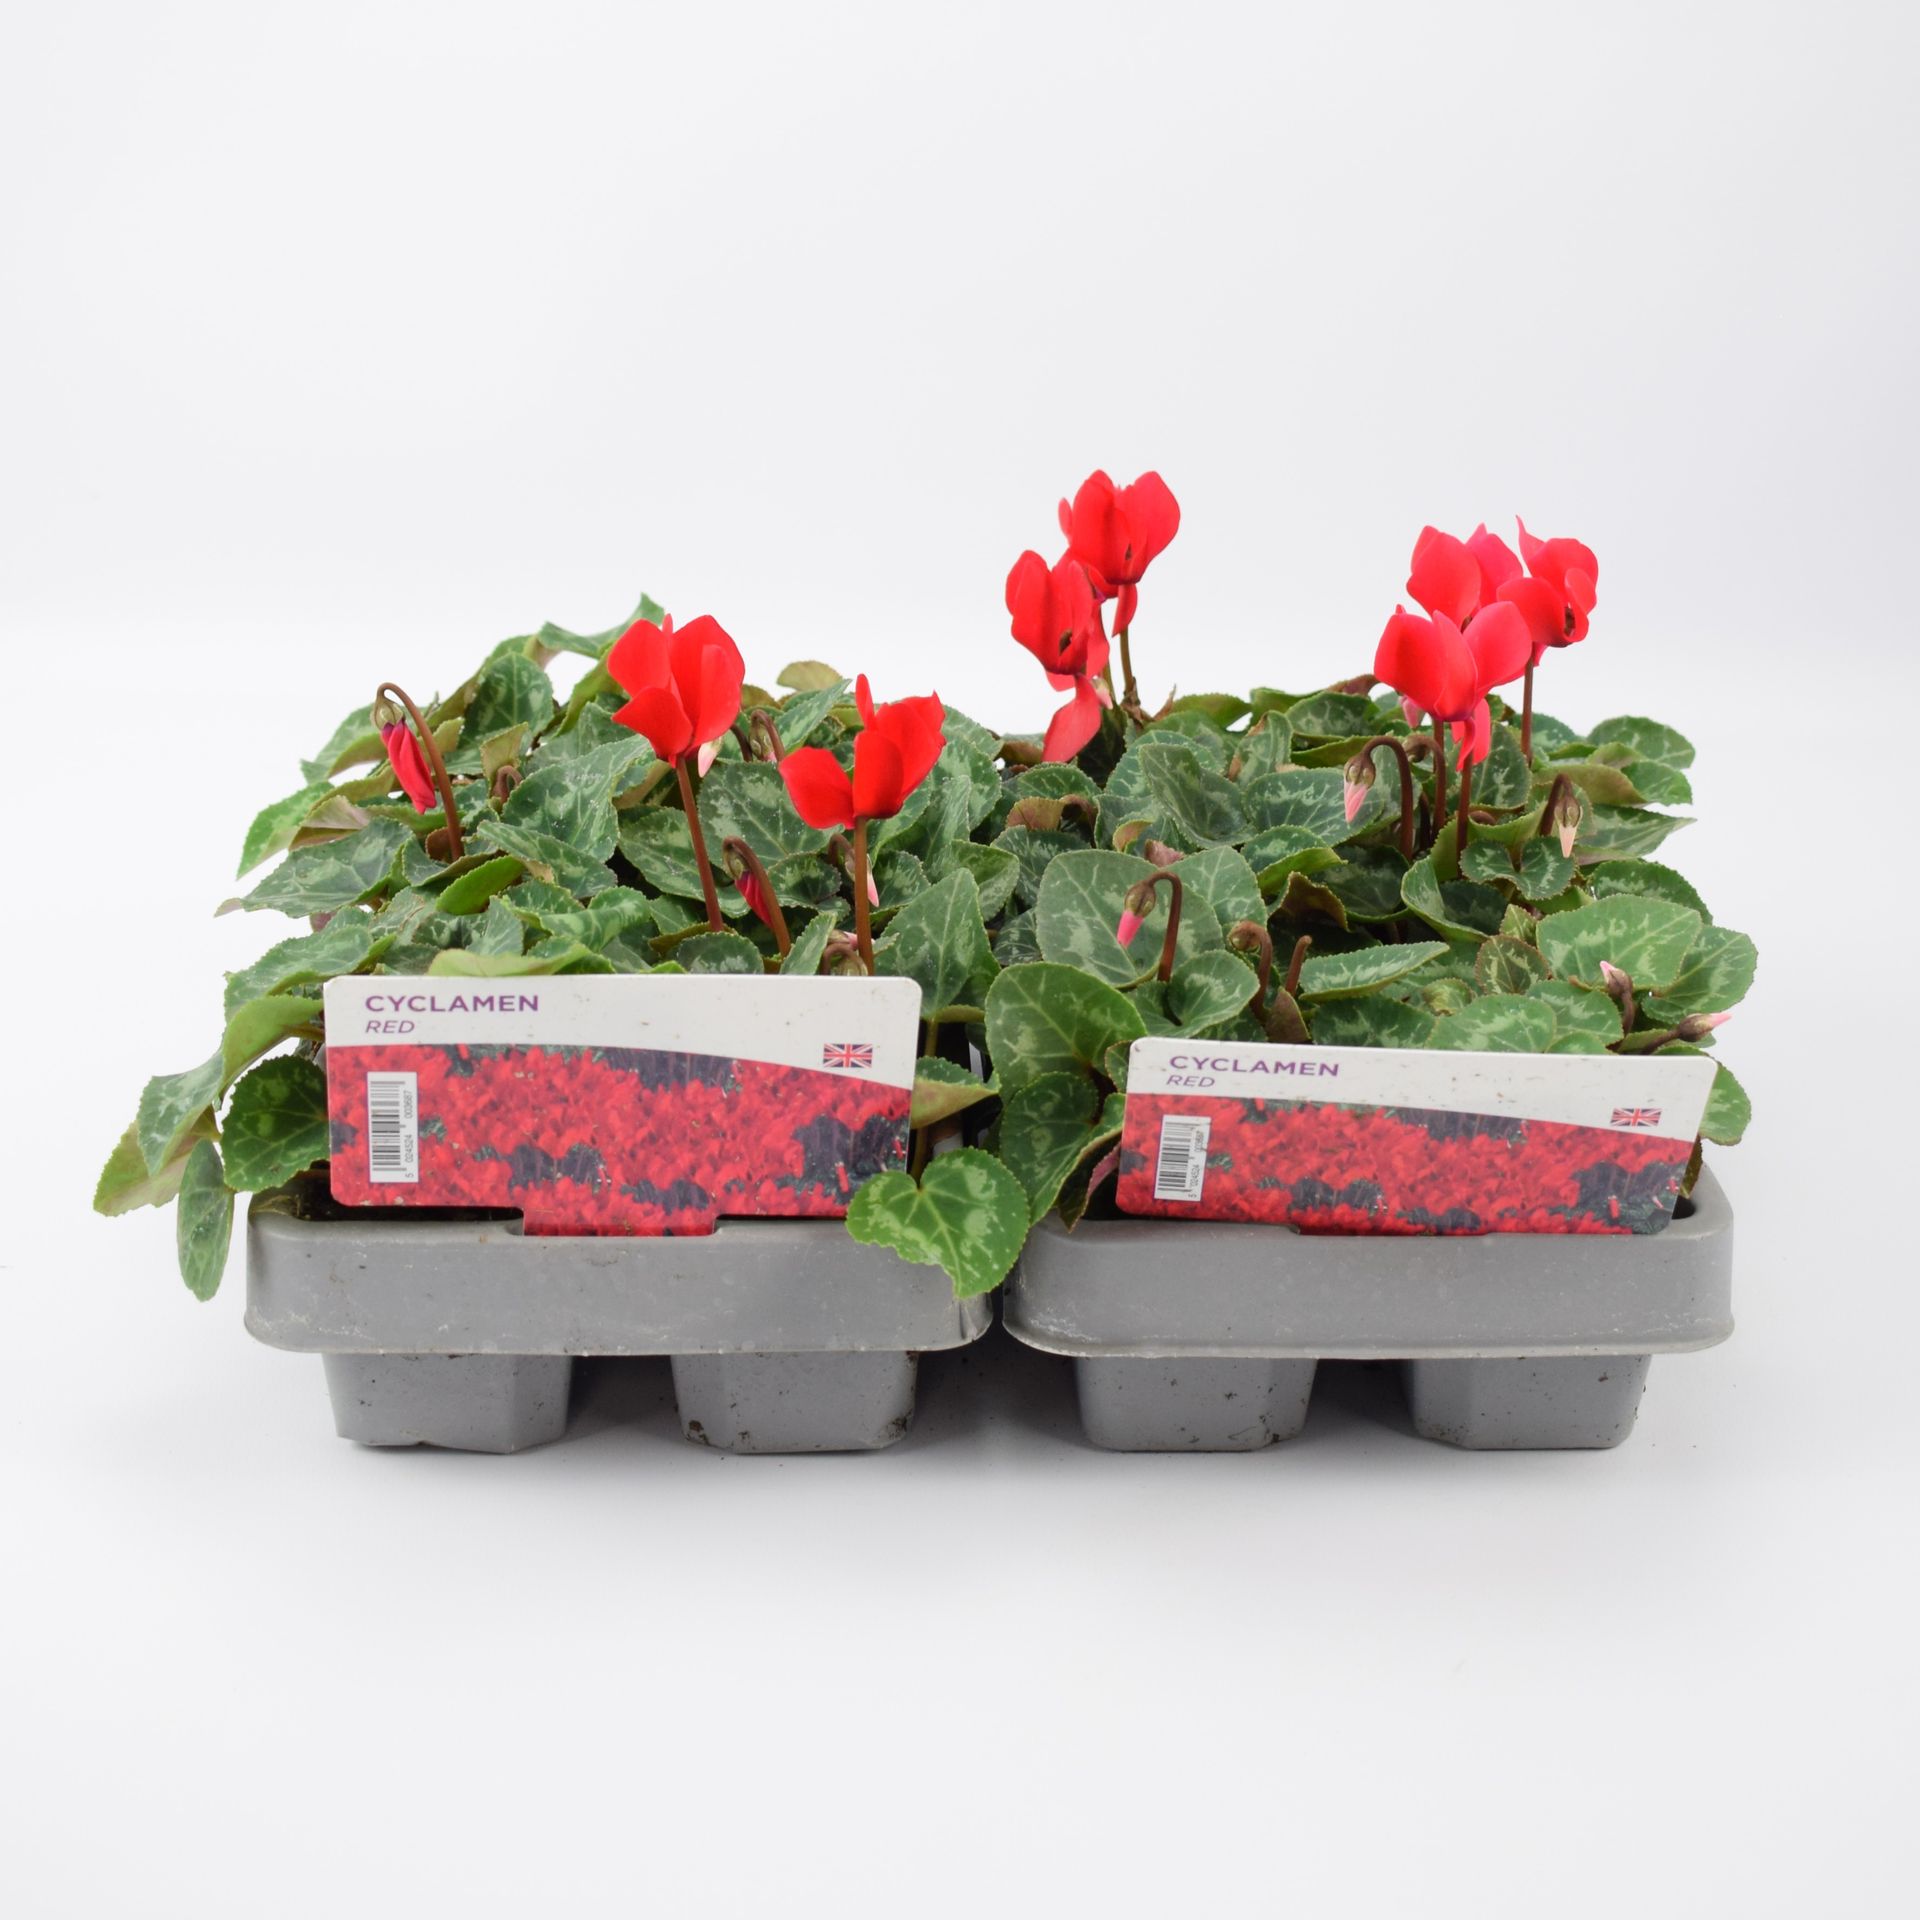 Cyclamen 'Red' 6 Pack x 2 - 12 Plants